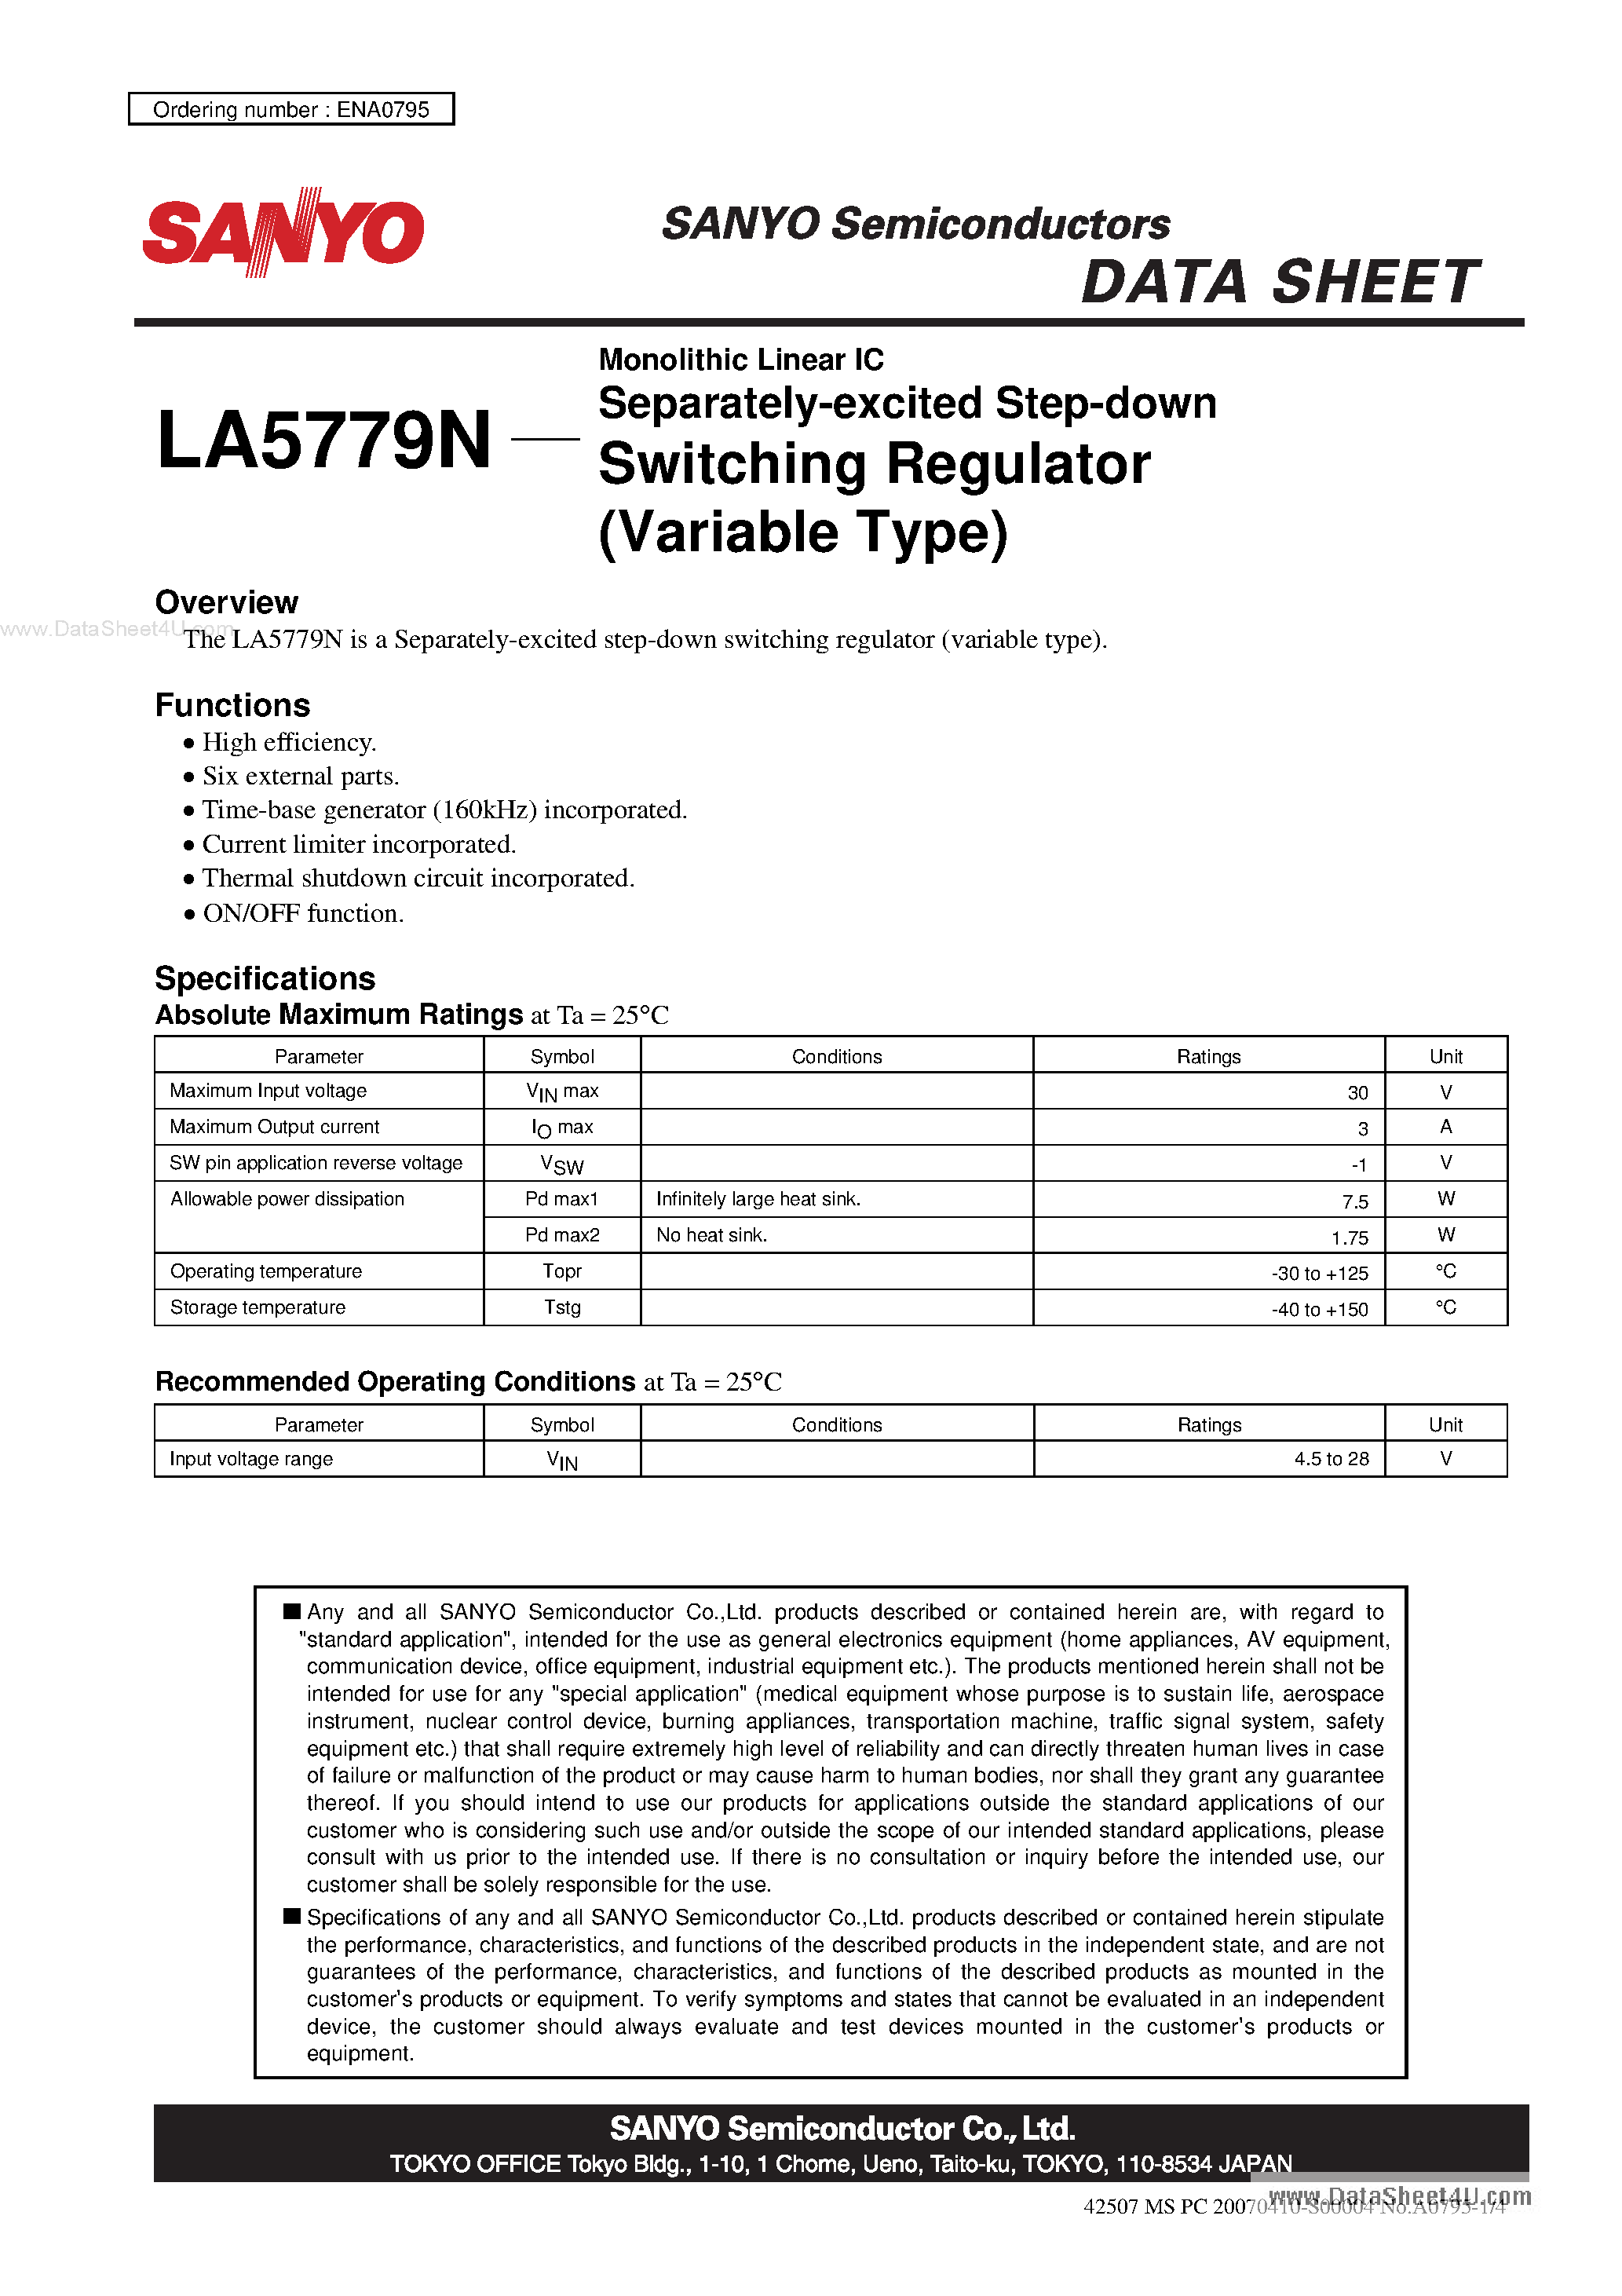 Datasheet LA5779N - Monolithic Linear IC Separately-excited Step-down Switching Regulator page 1